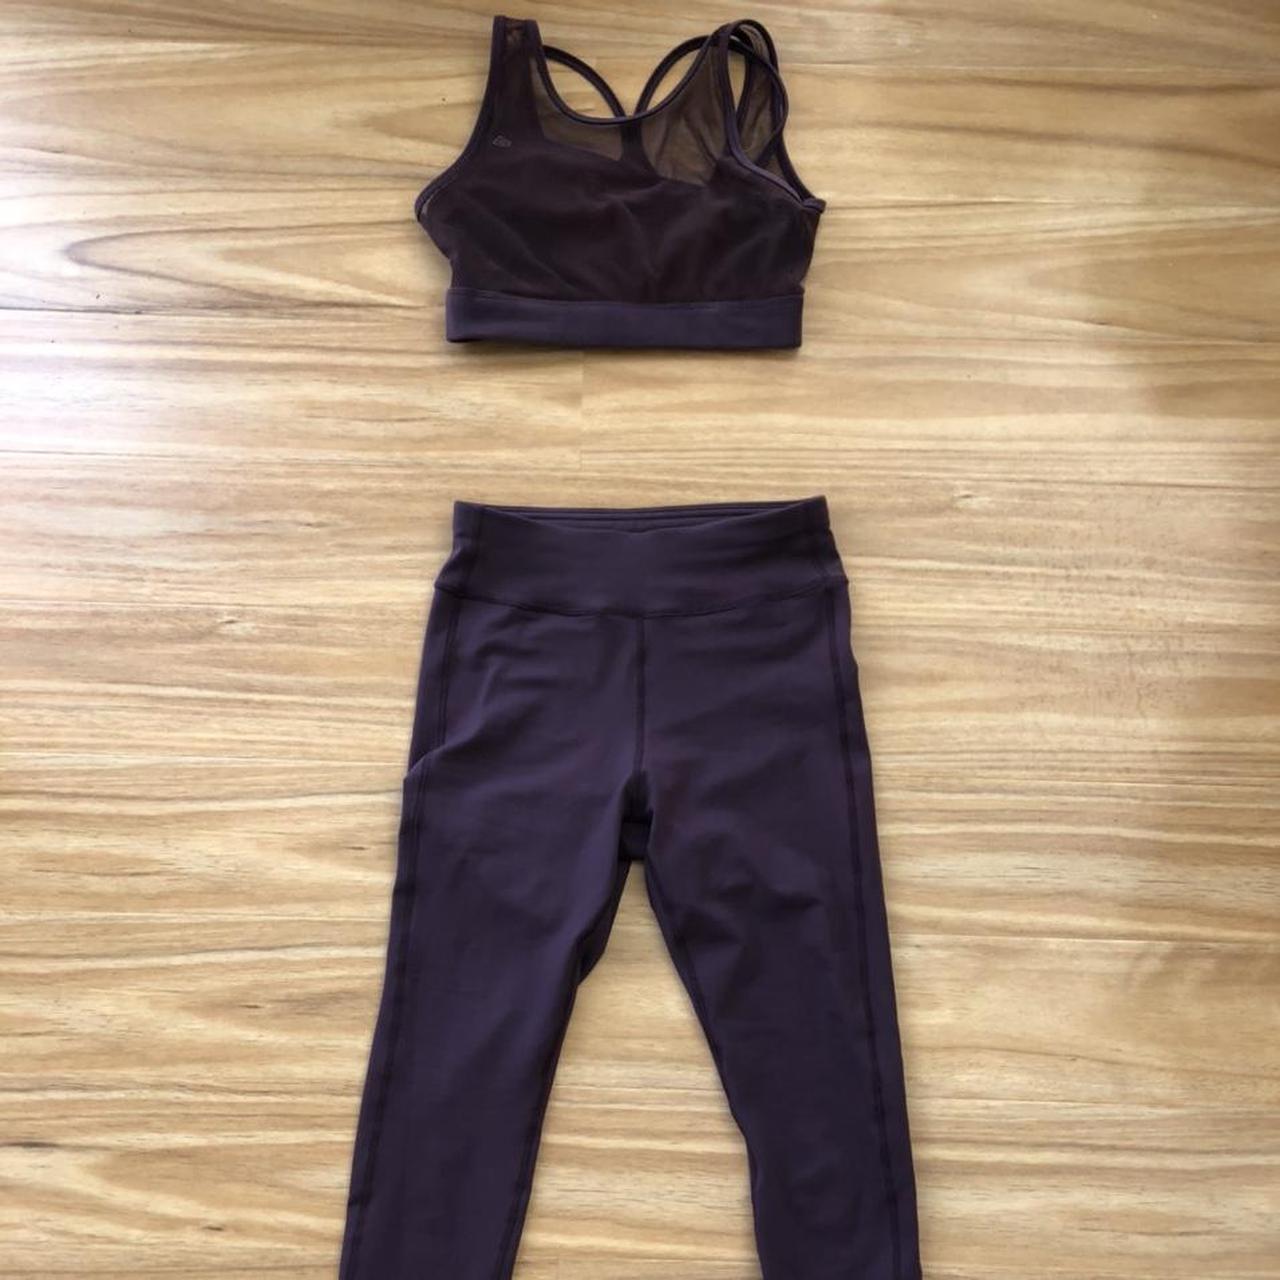 Annabelle of London activewear set size S in both... - Depop